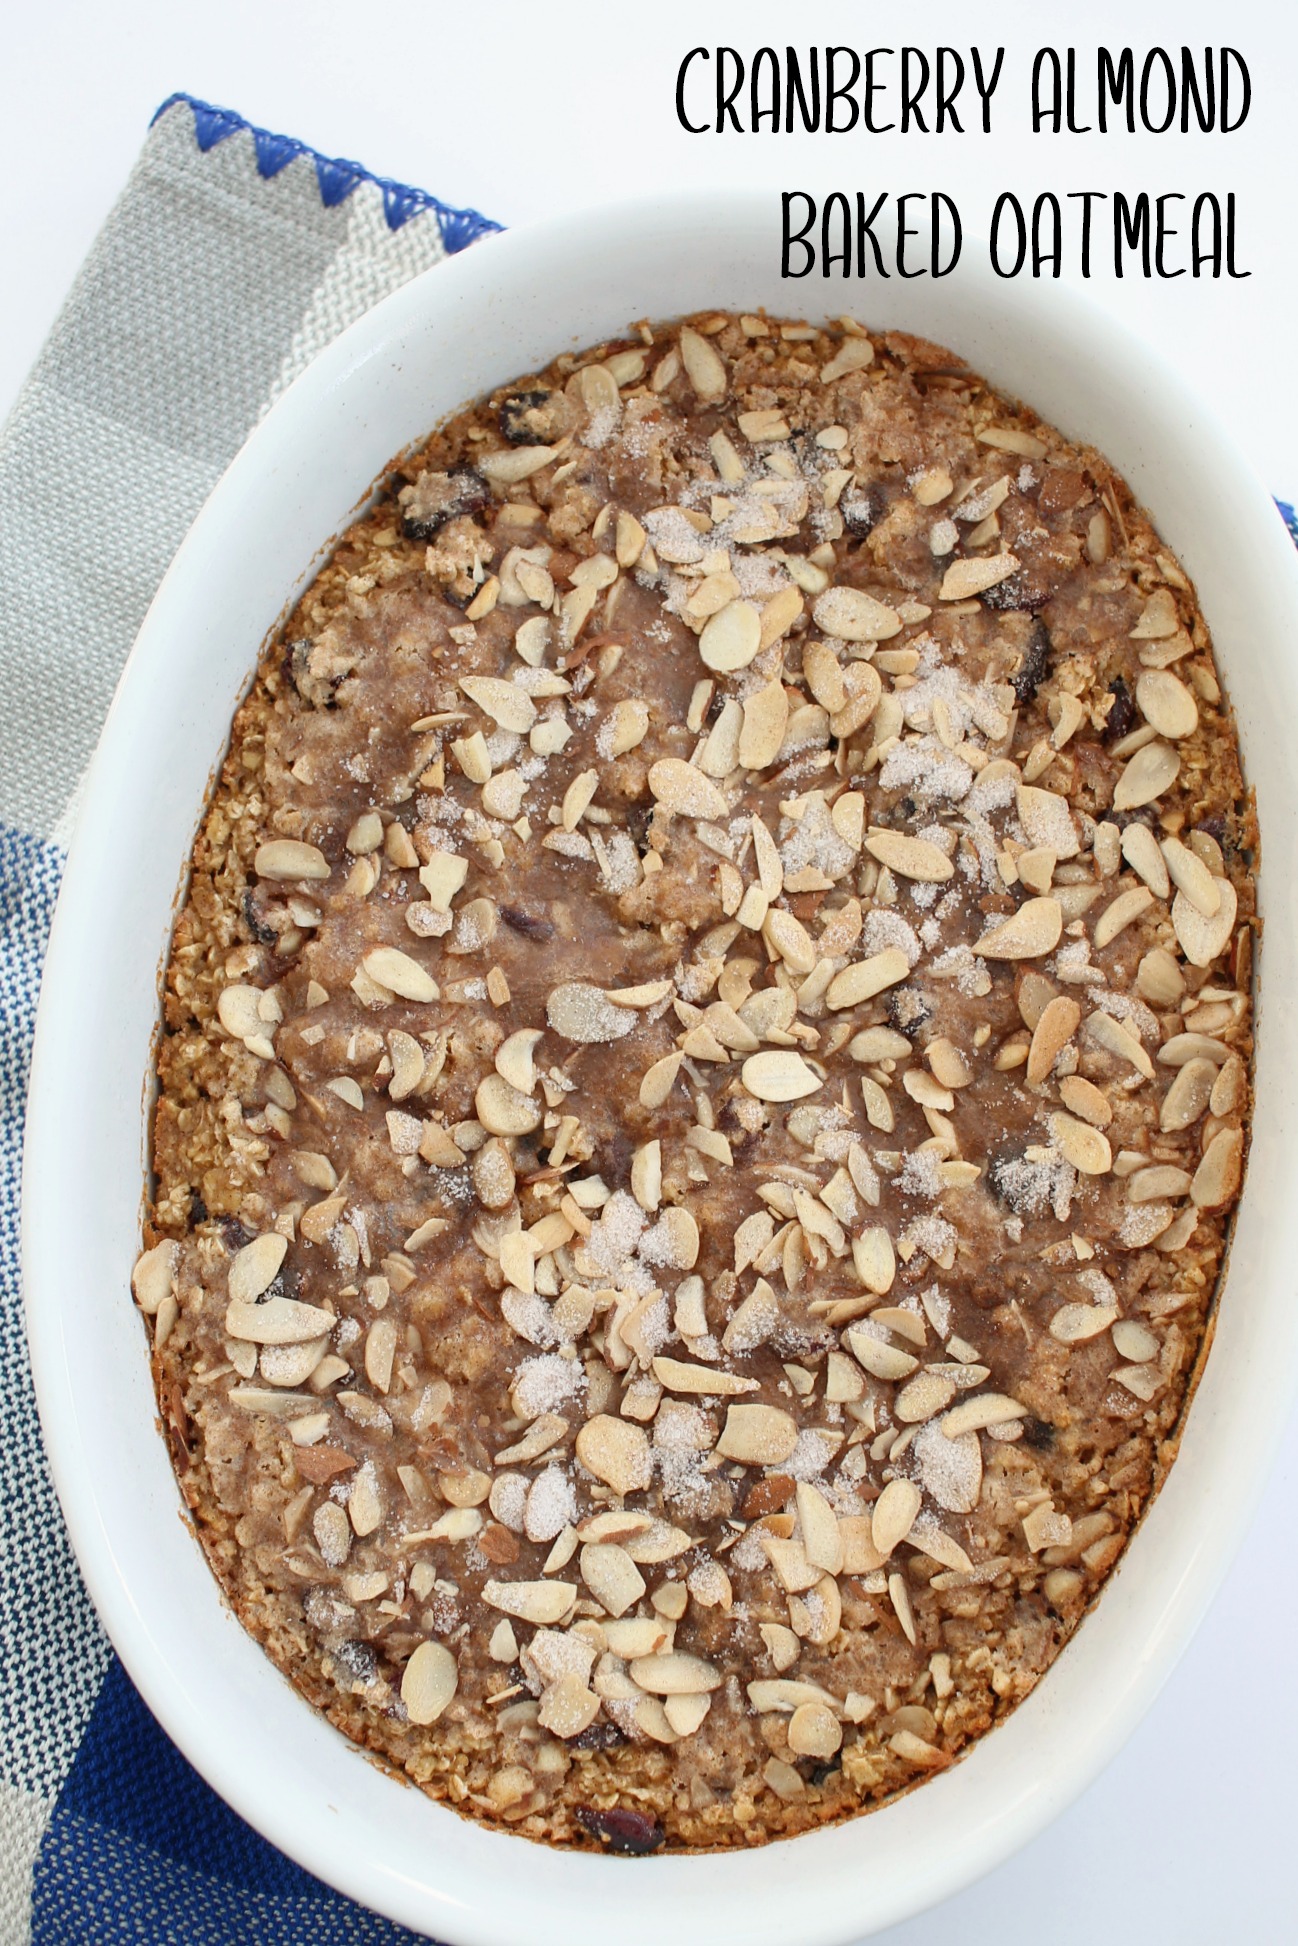 white oval casserole dish with cranberry almond baked oatmeal